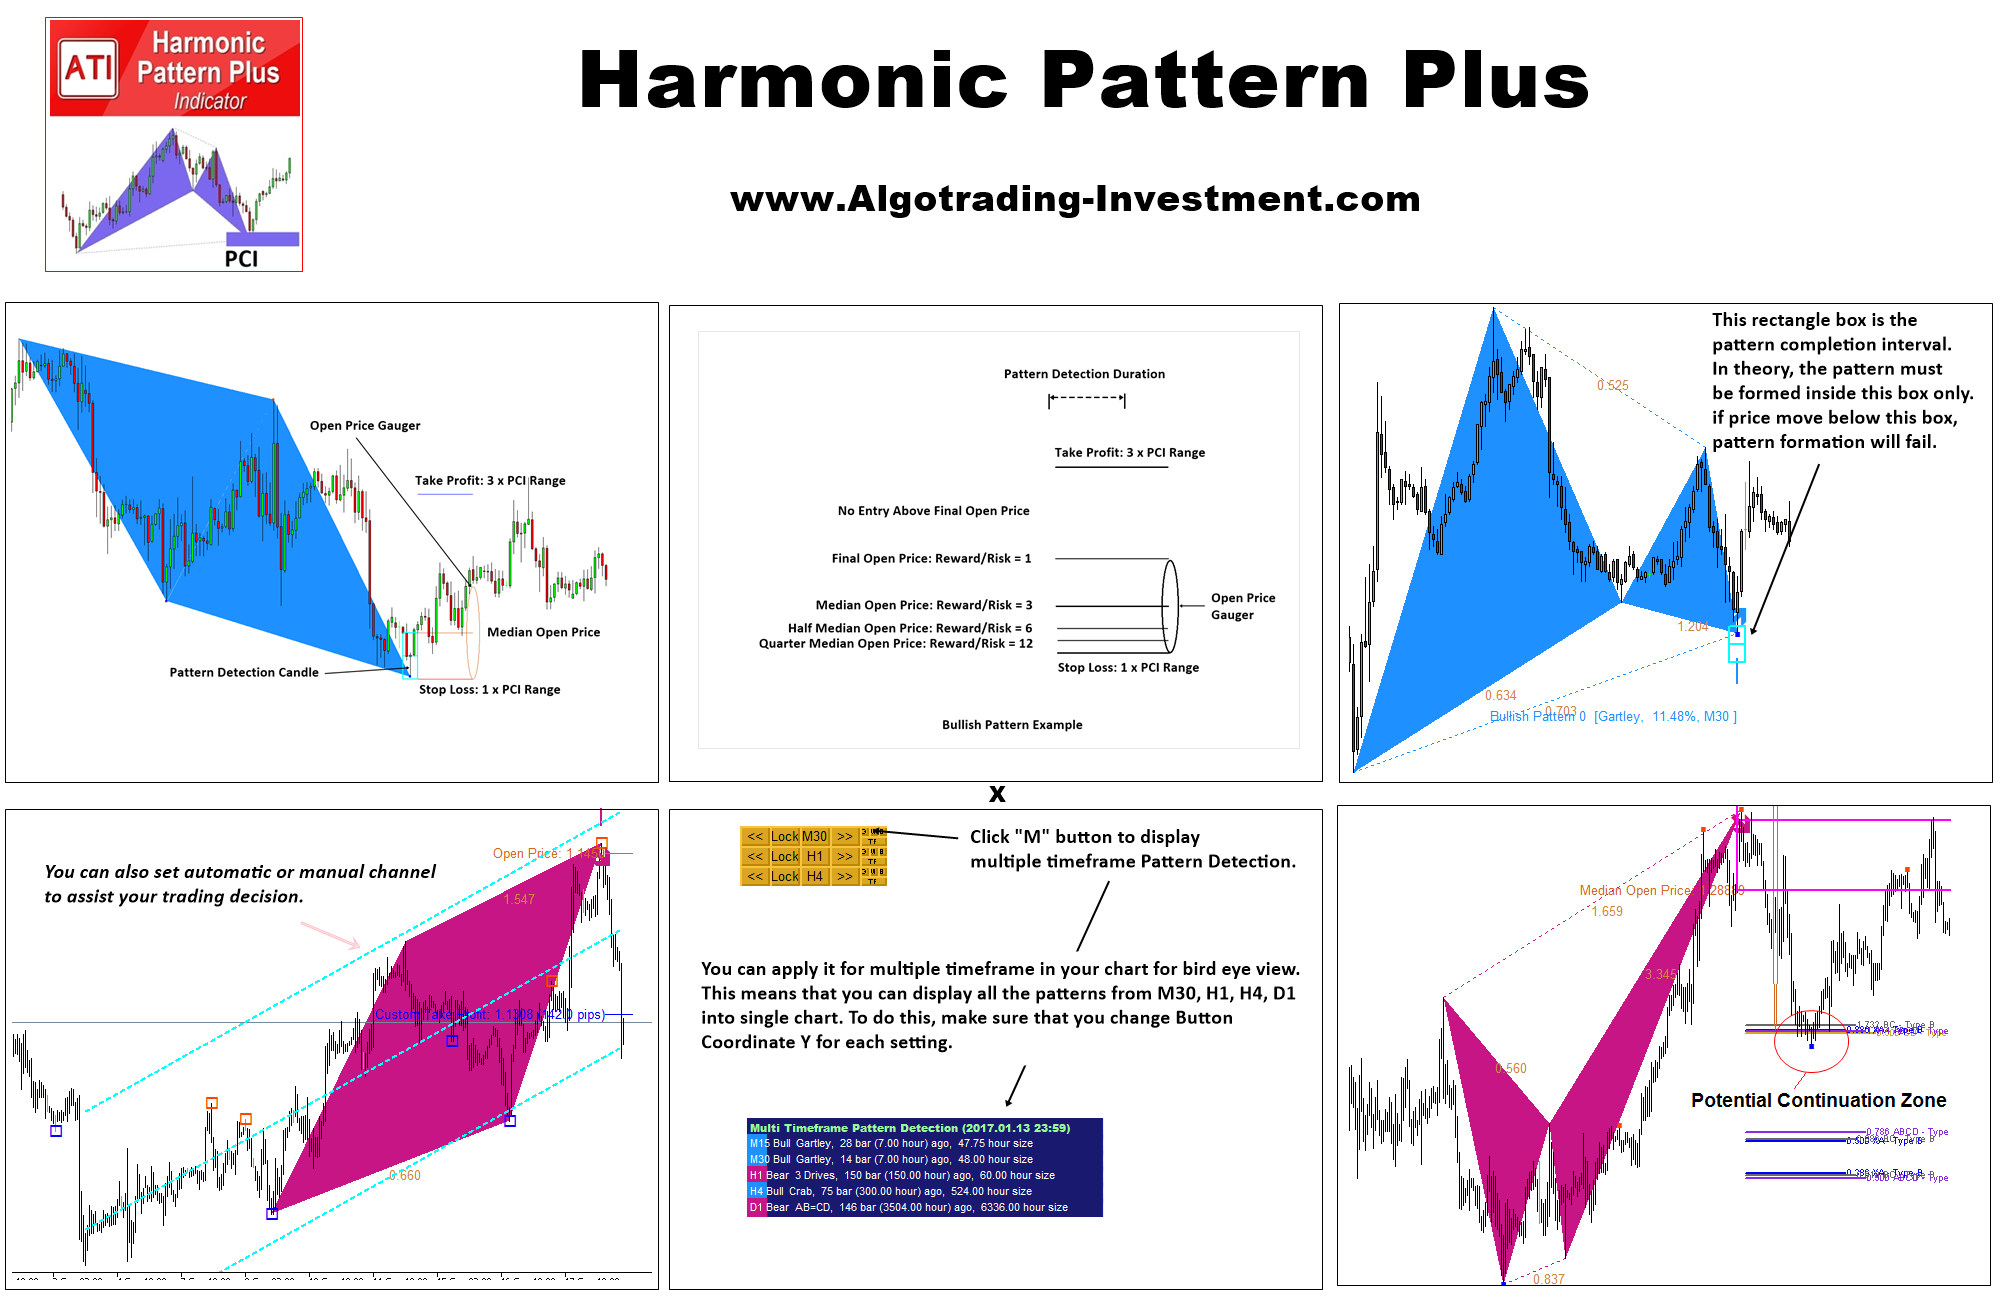 List Of Features For Harmonic Pattern Indicator Trading Strategies